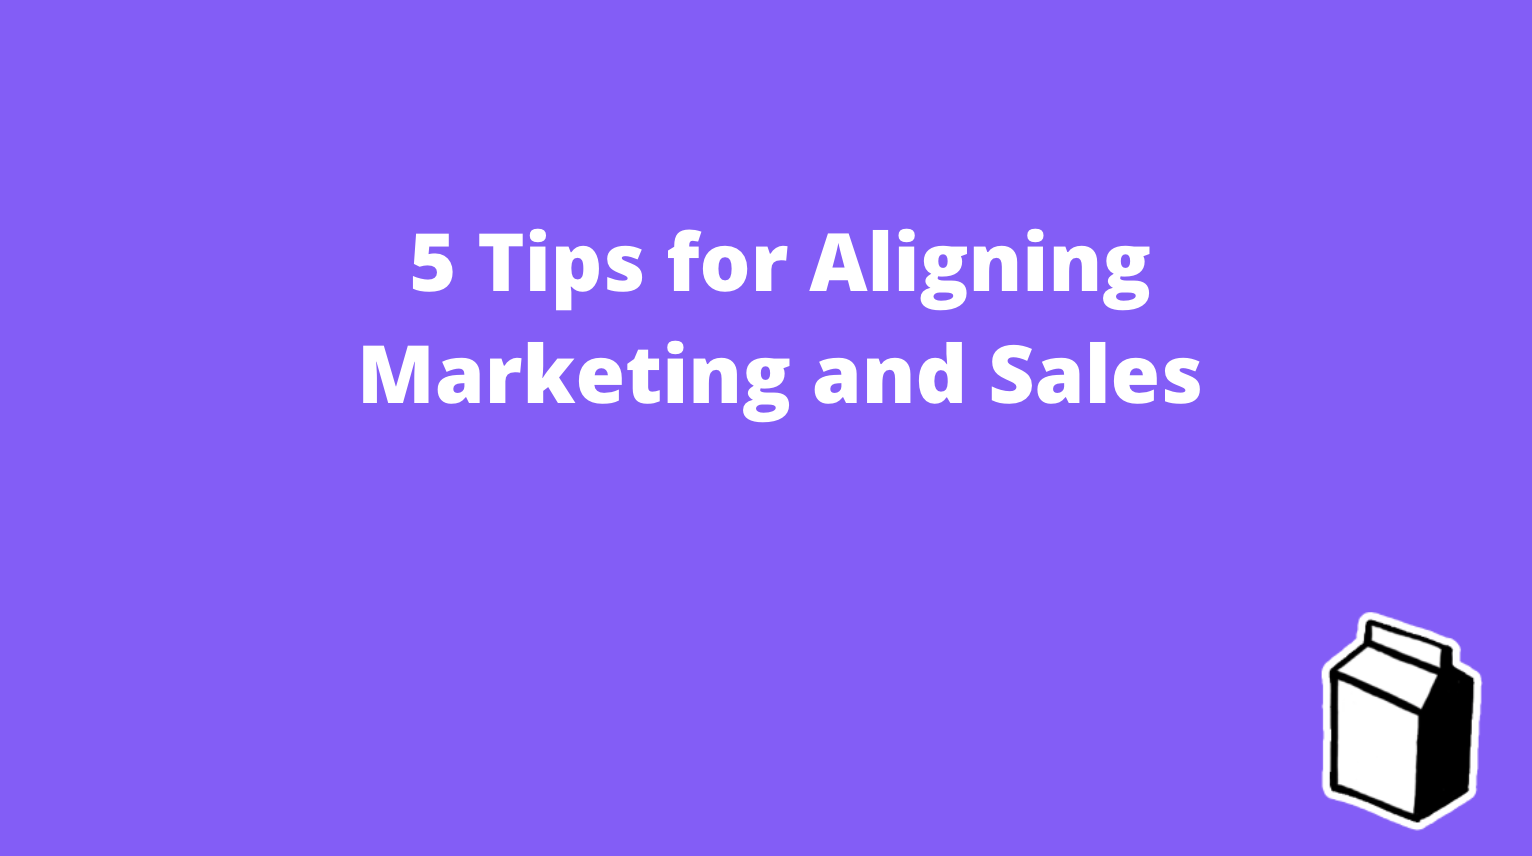 Aligning marketing and sales